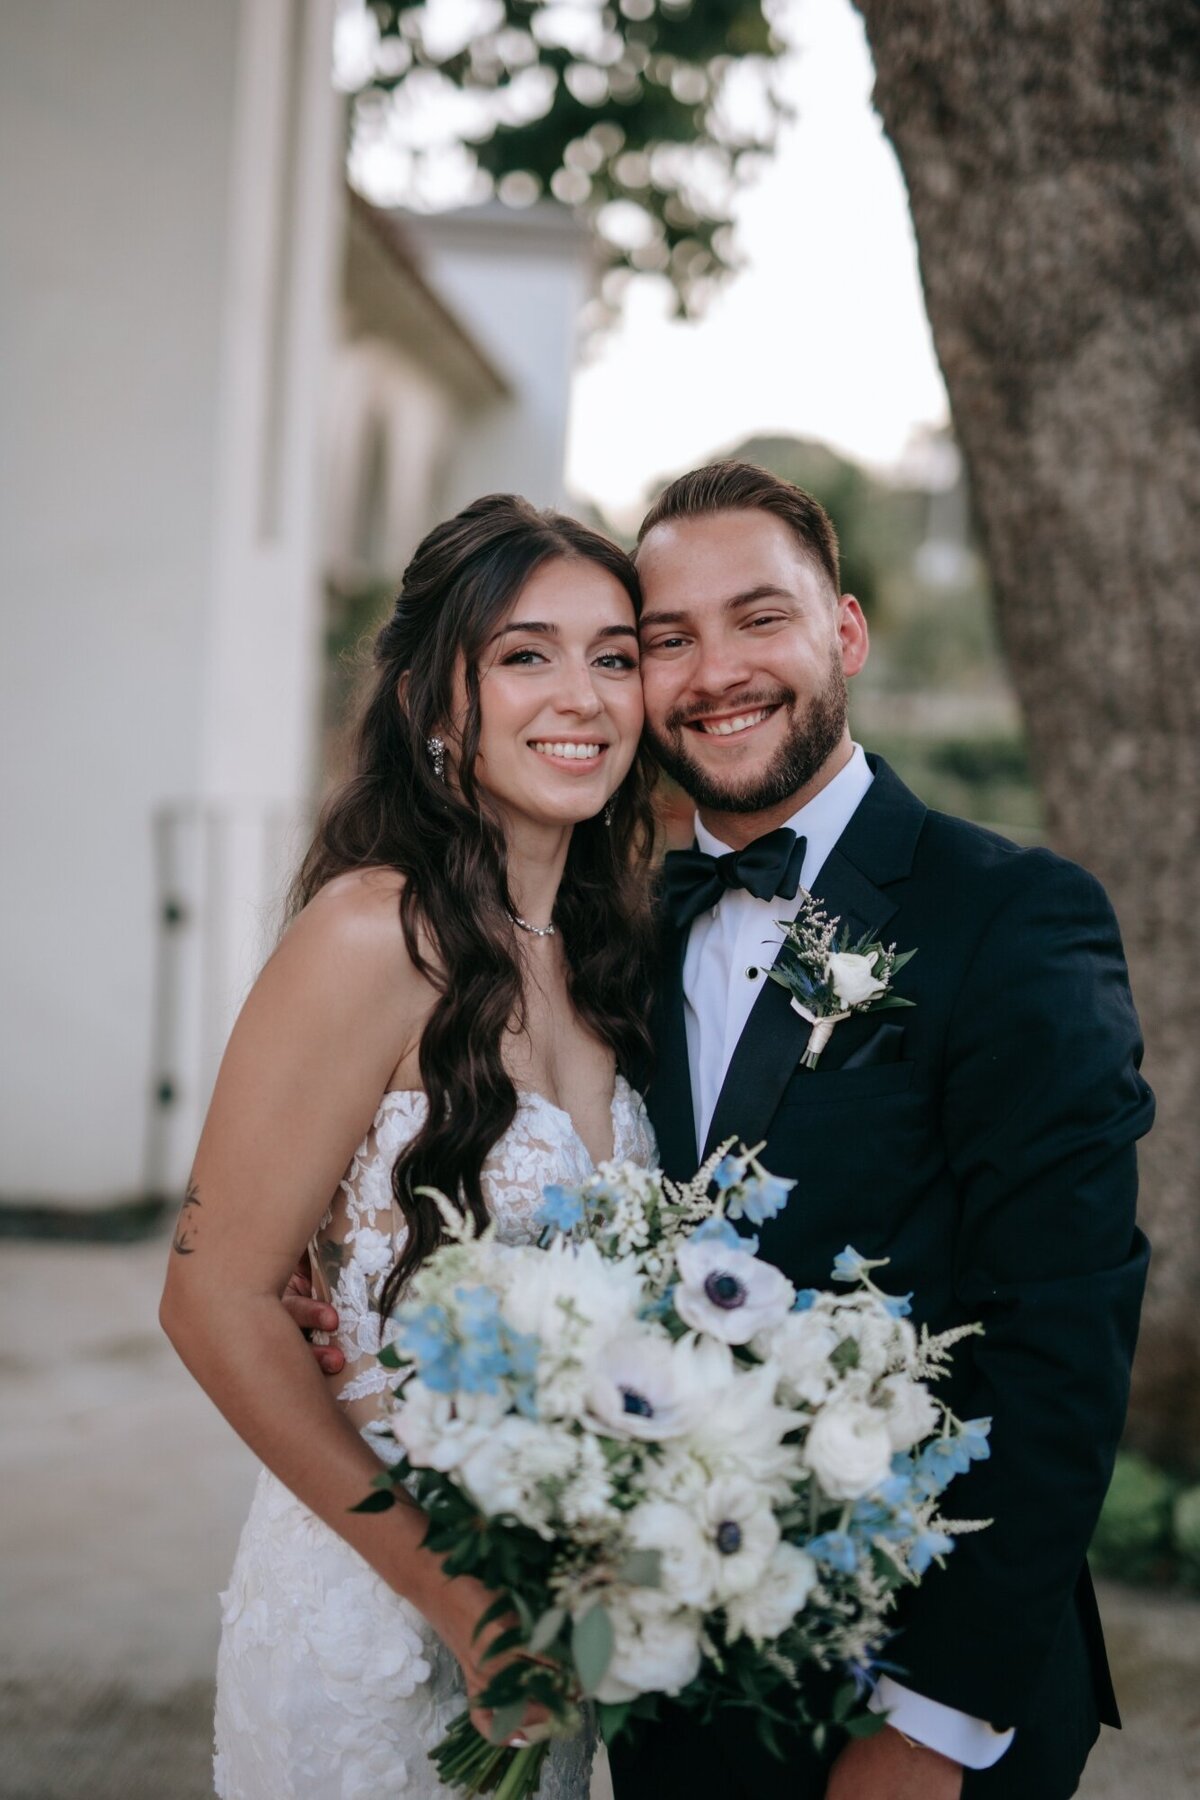 Bride and Groom smiling while bride holds her blue and white bouquet.